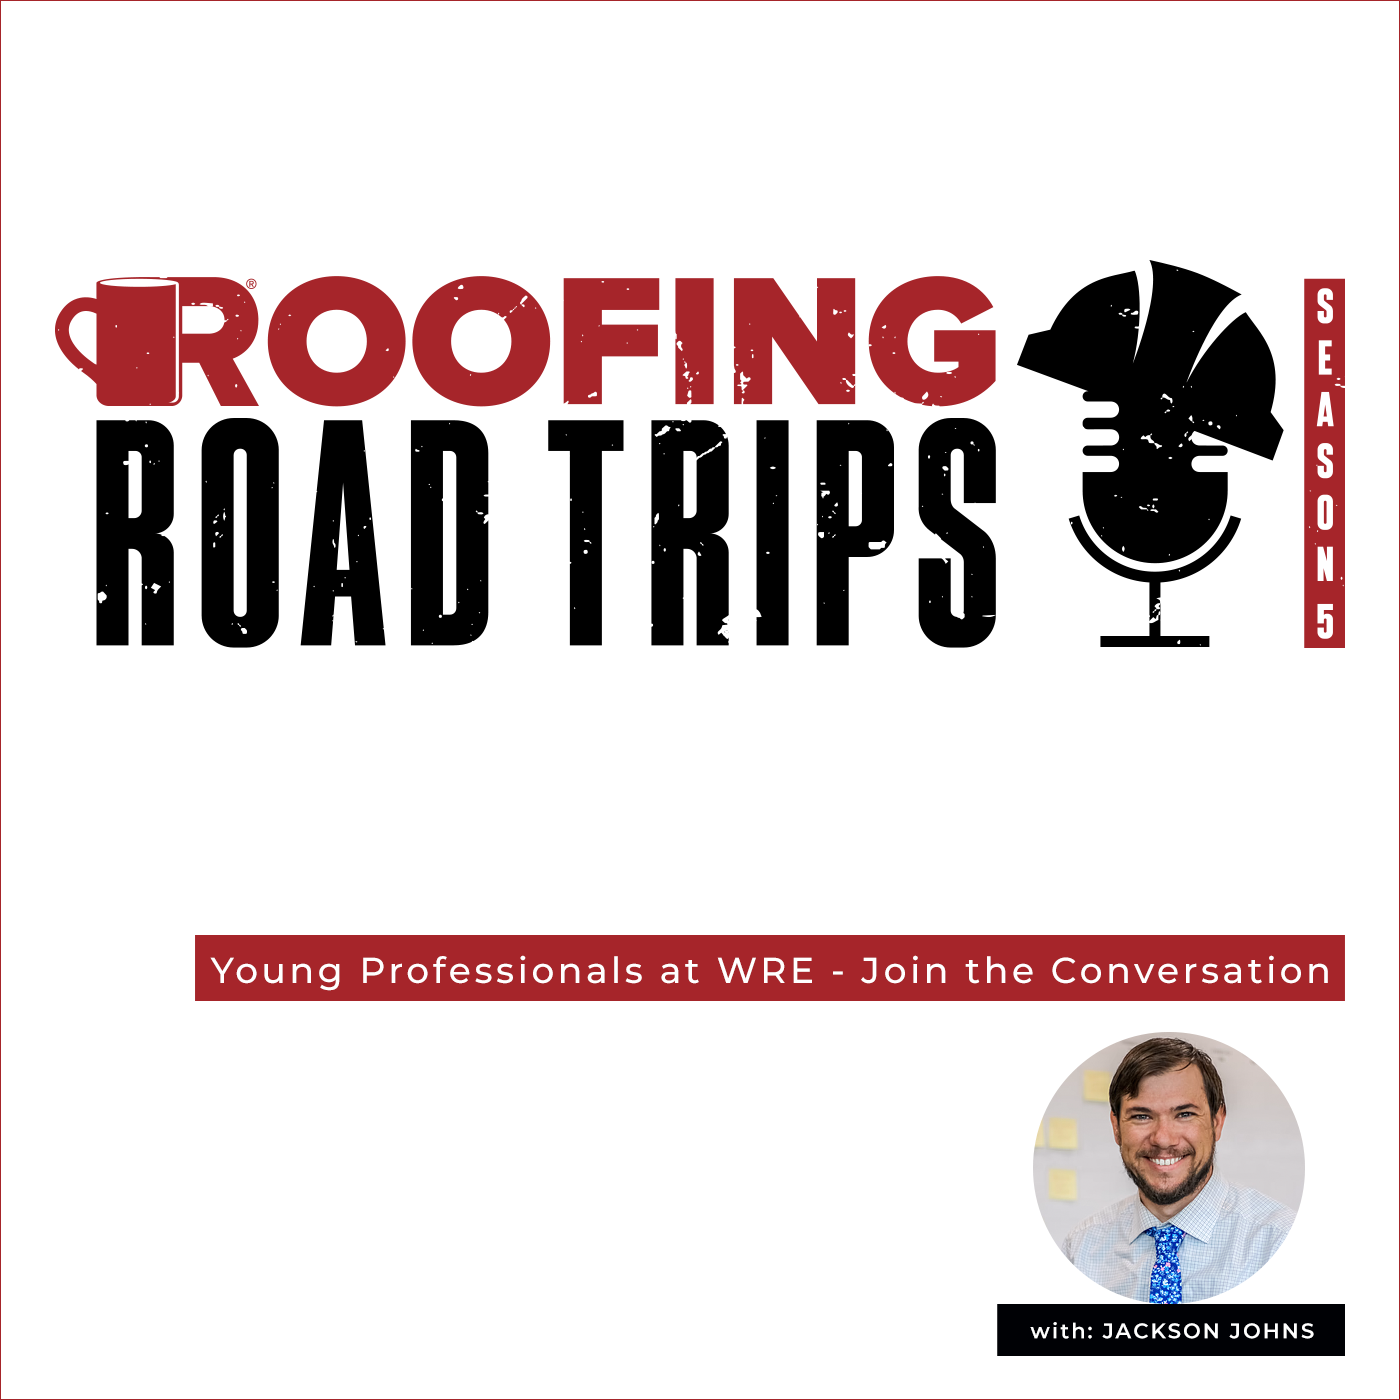 Jackson Johns - Young Professionals at WRE - Join the Conversation